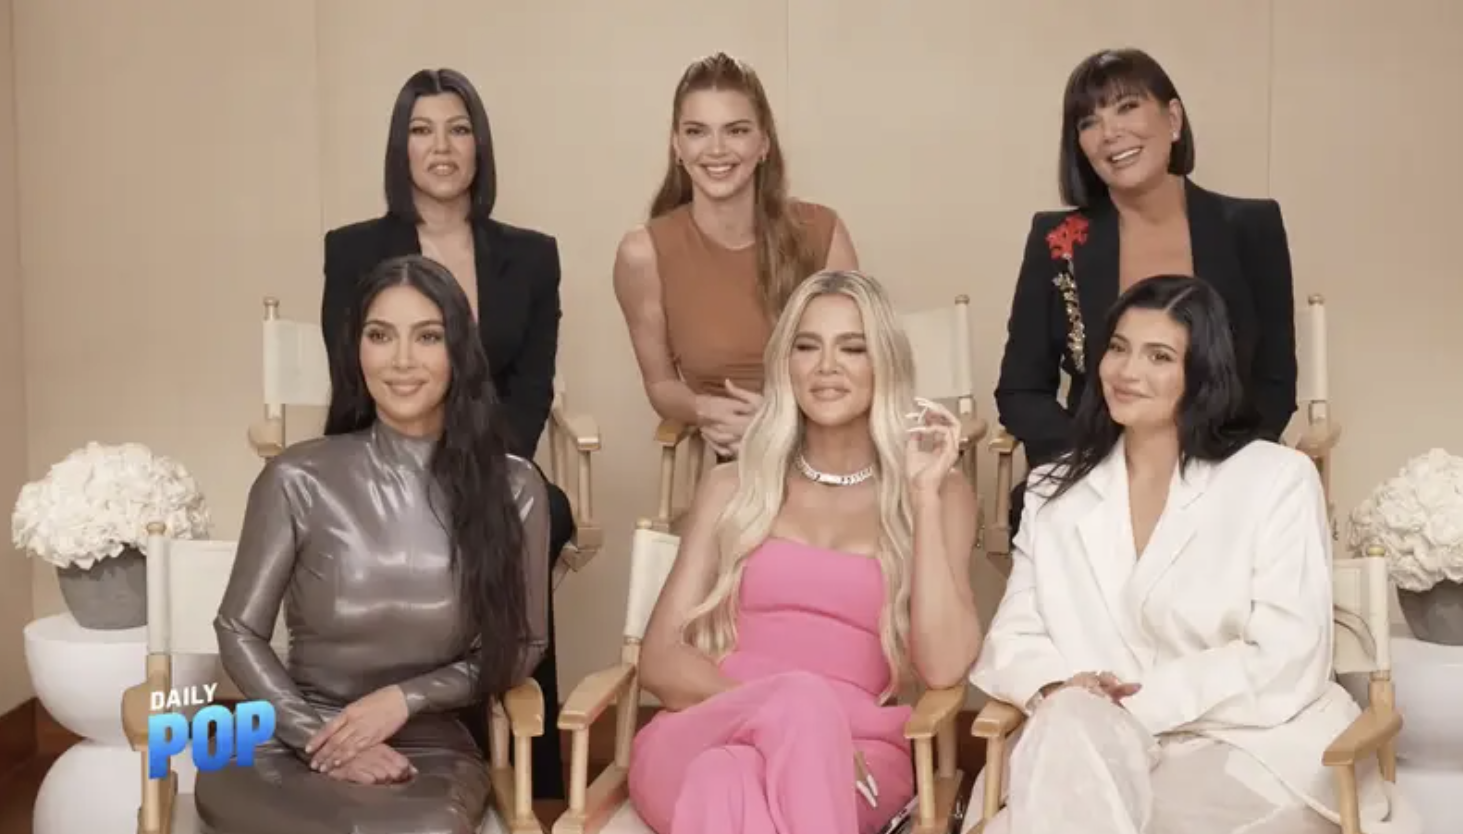 The Jenners and Kardashians on a talk show called Daily Pop